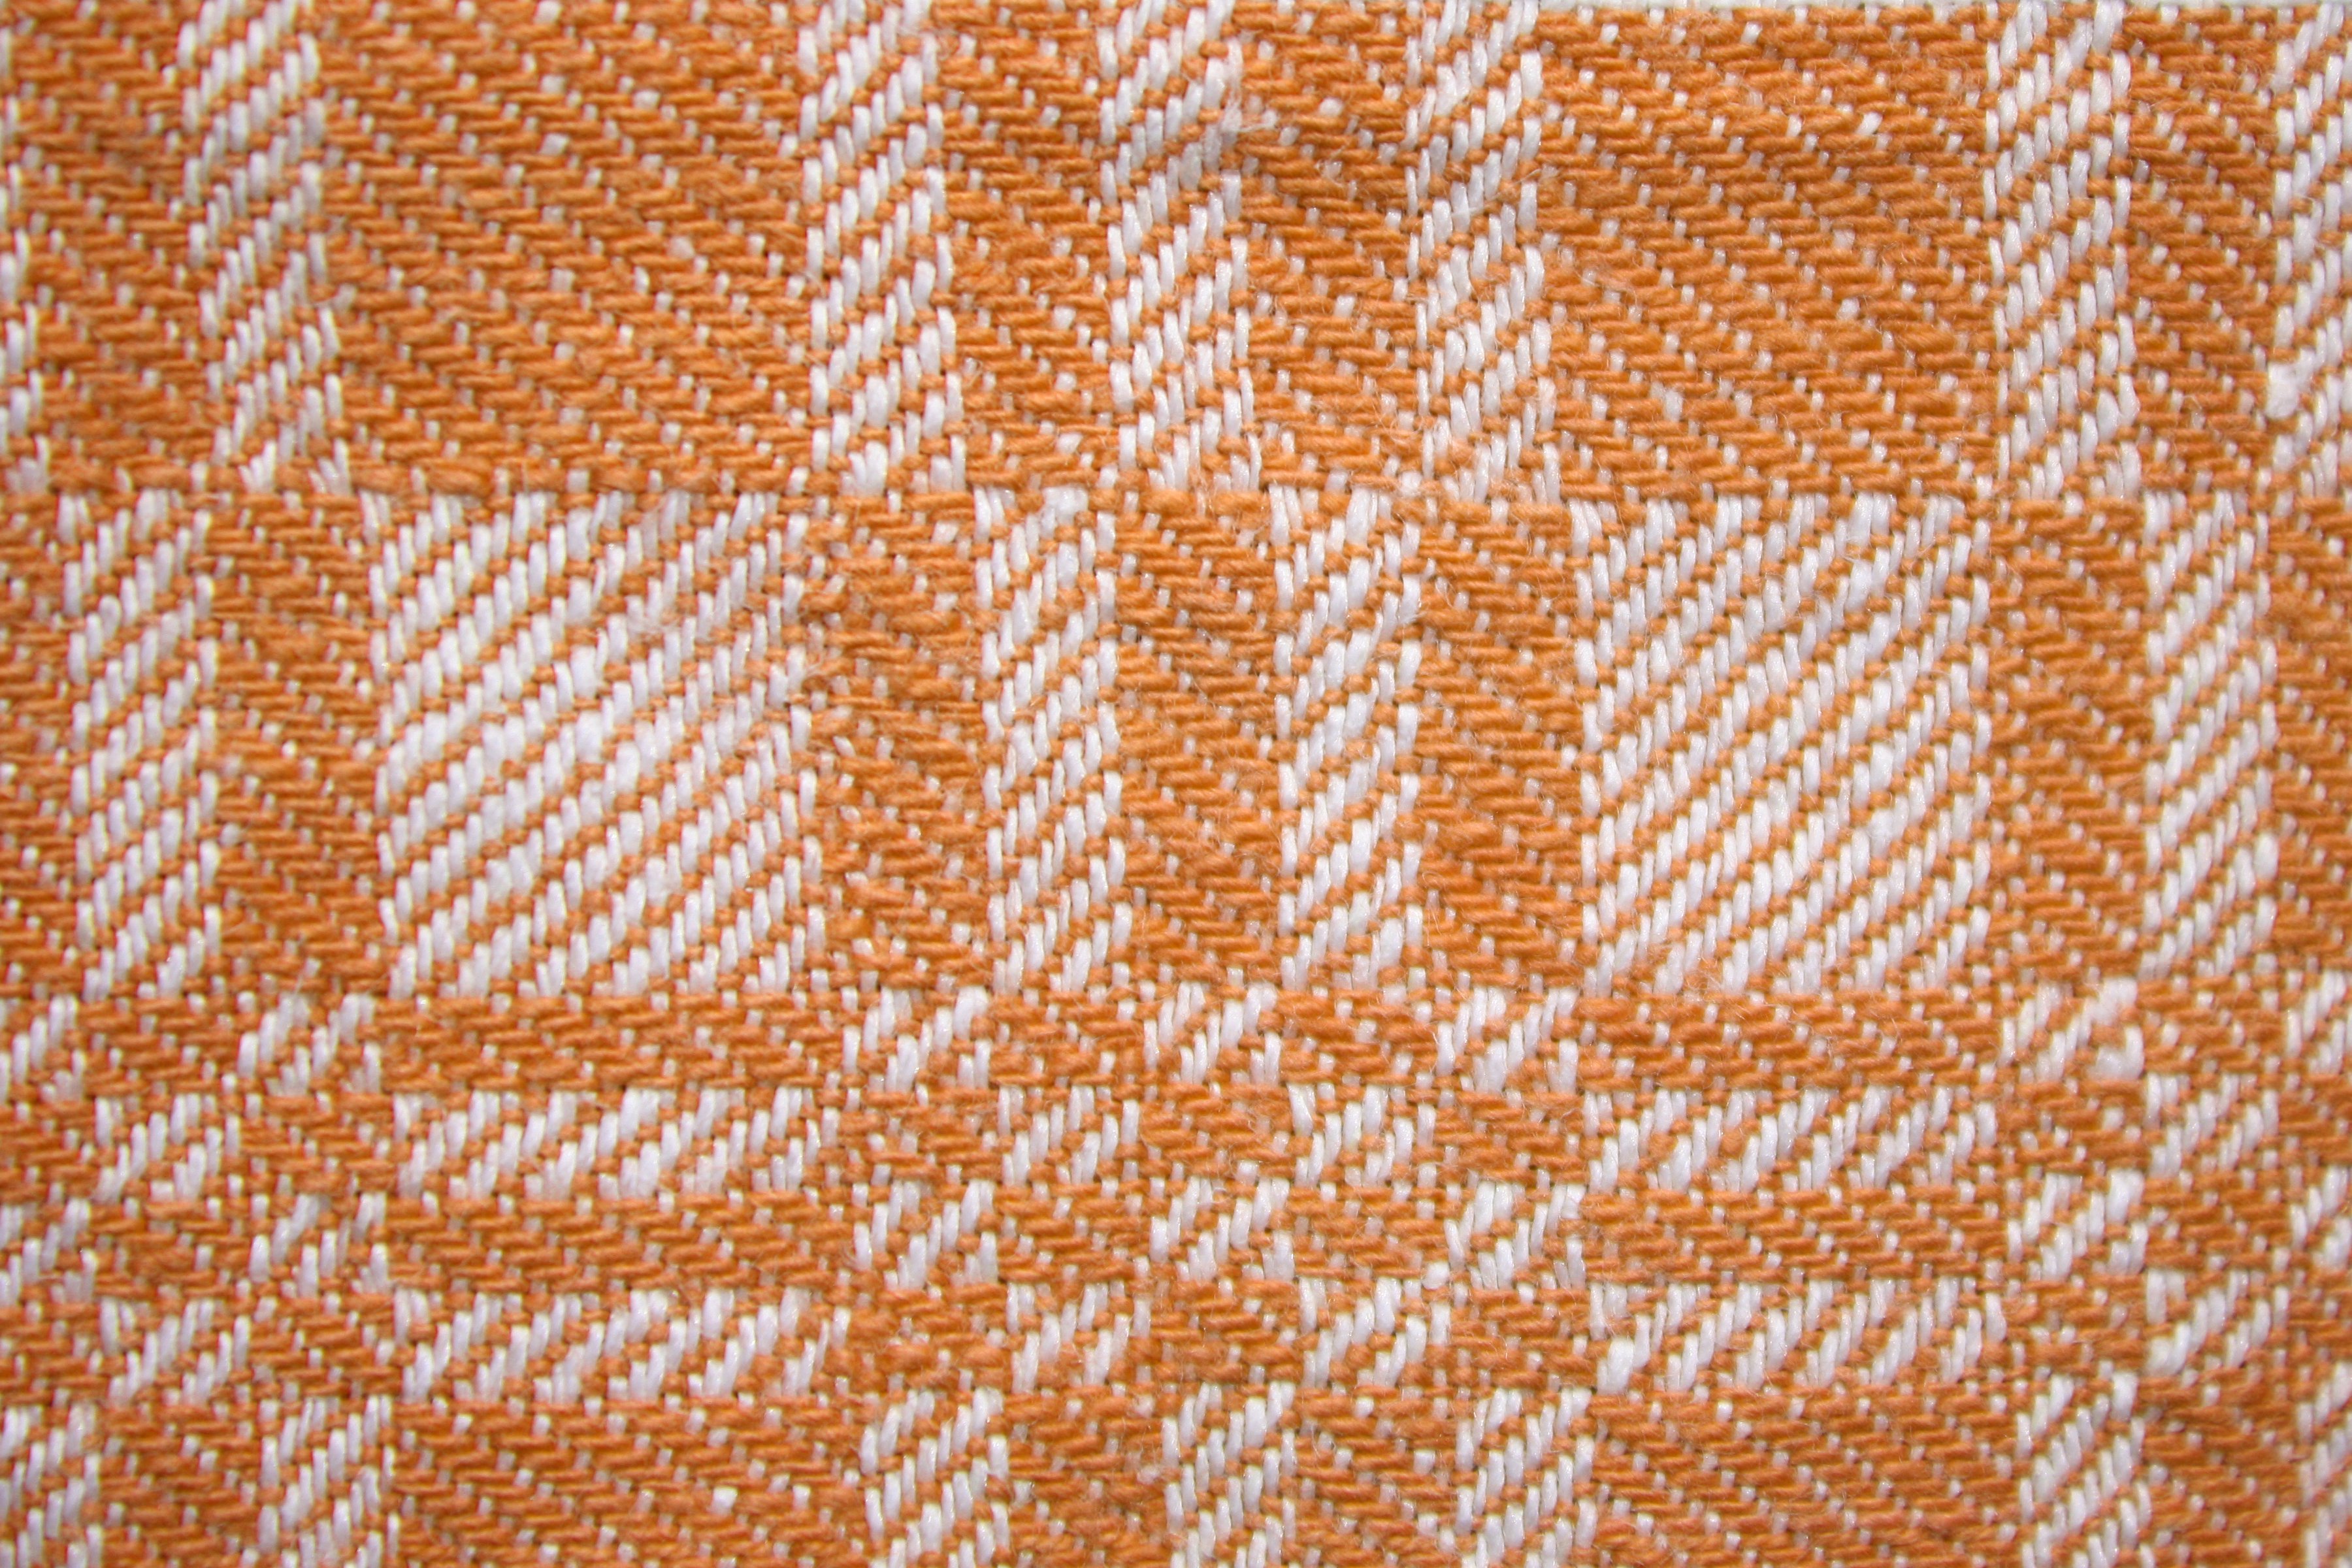 Orange and White Woven Fabric Texture with Squares Pattern ...
